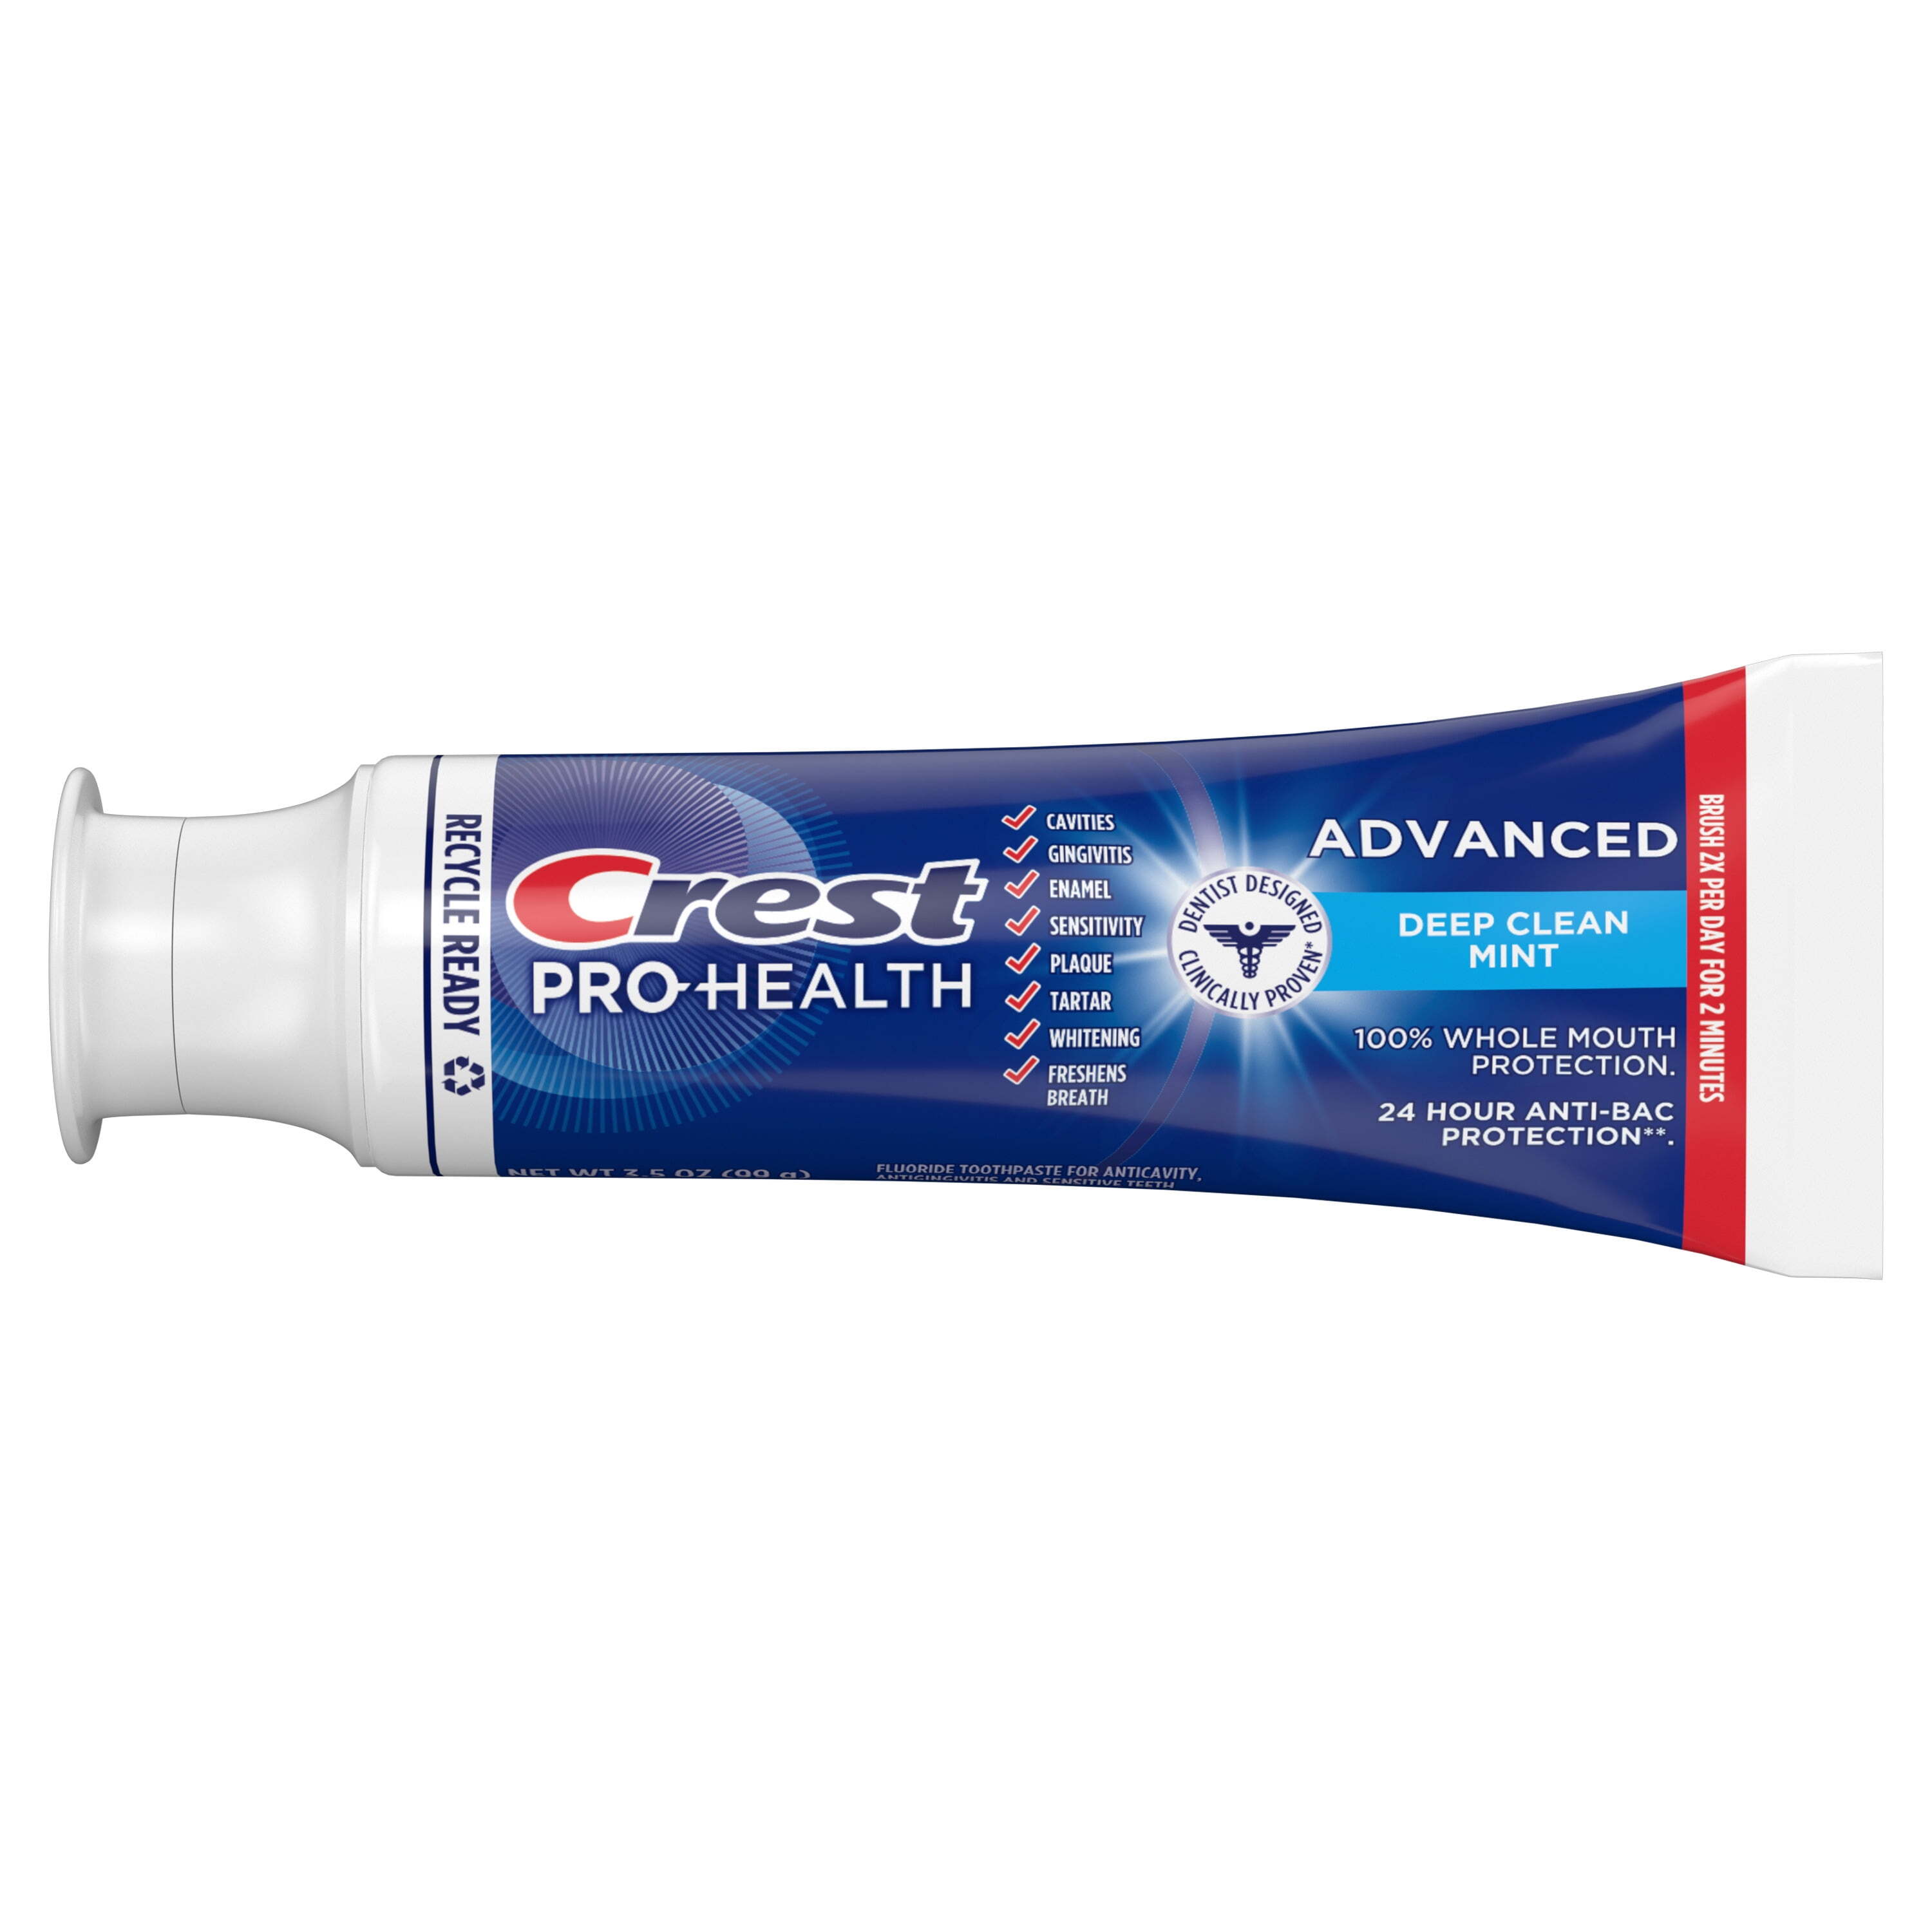 Crest Pro Health Advanced Deep Clean Toothpaste, Mint, 3.5 oz - image 3 of 8